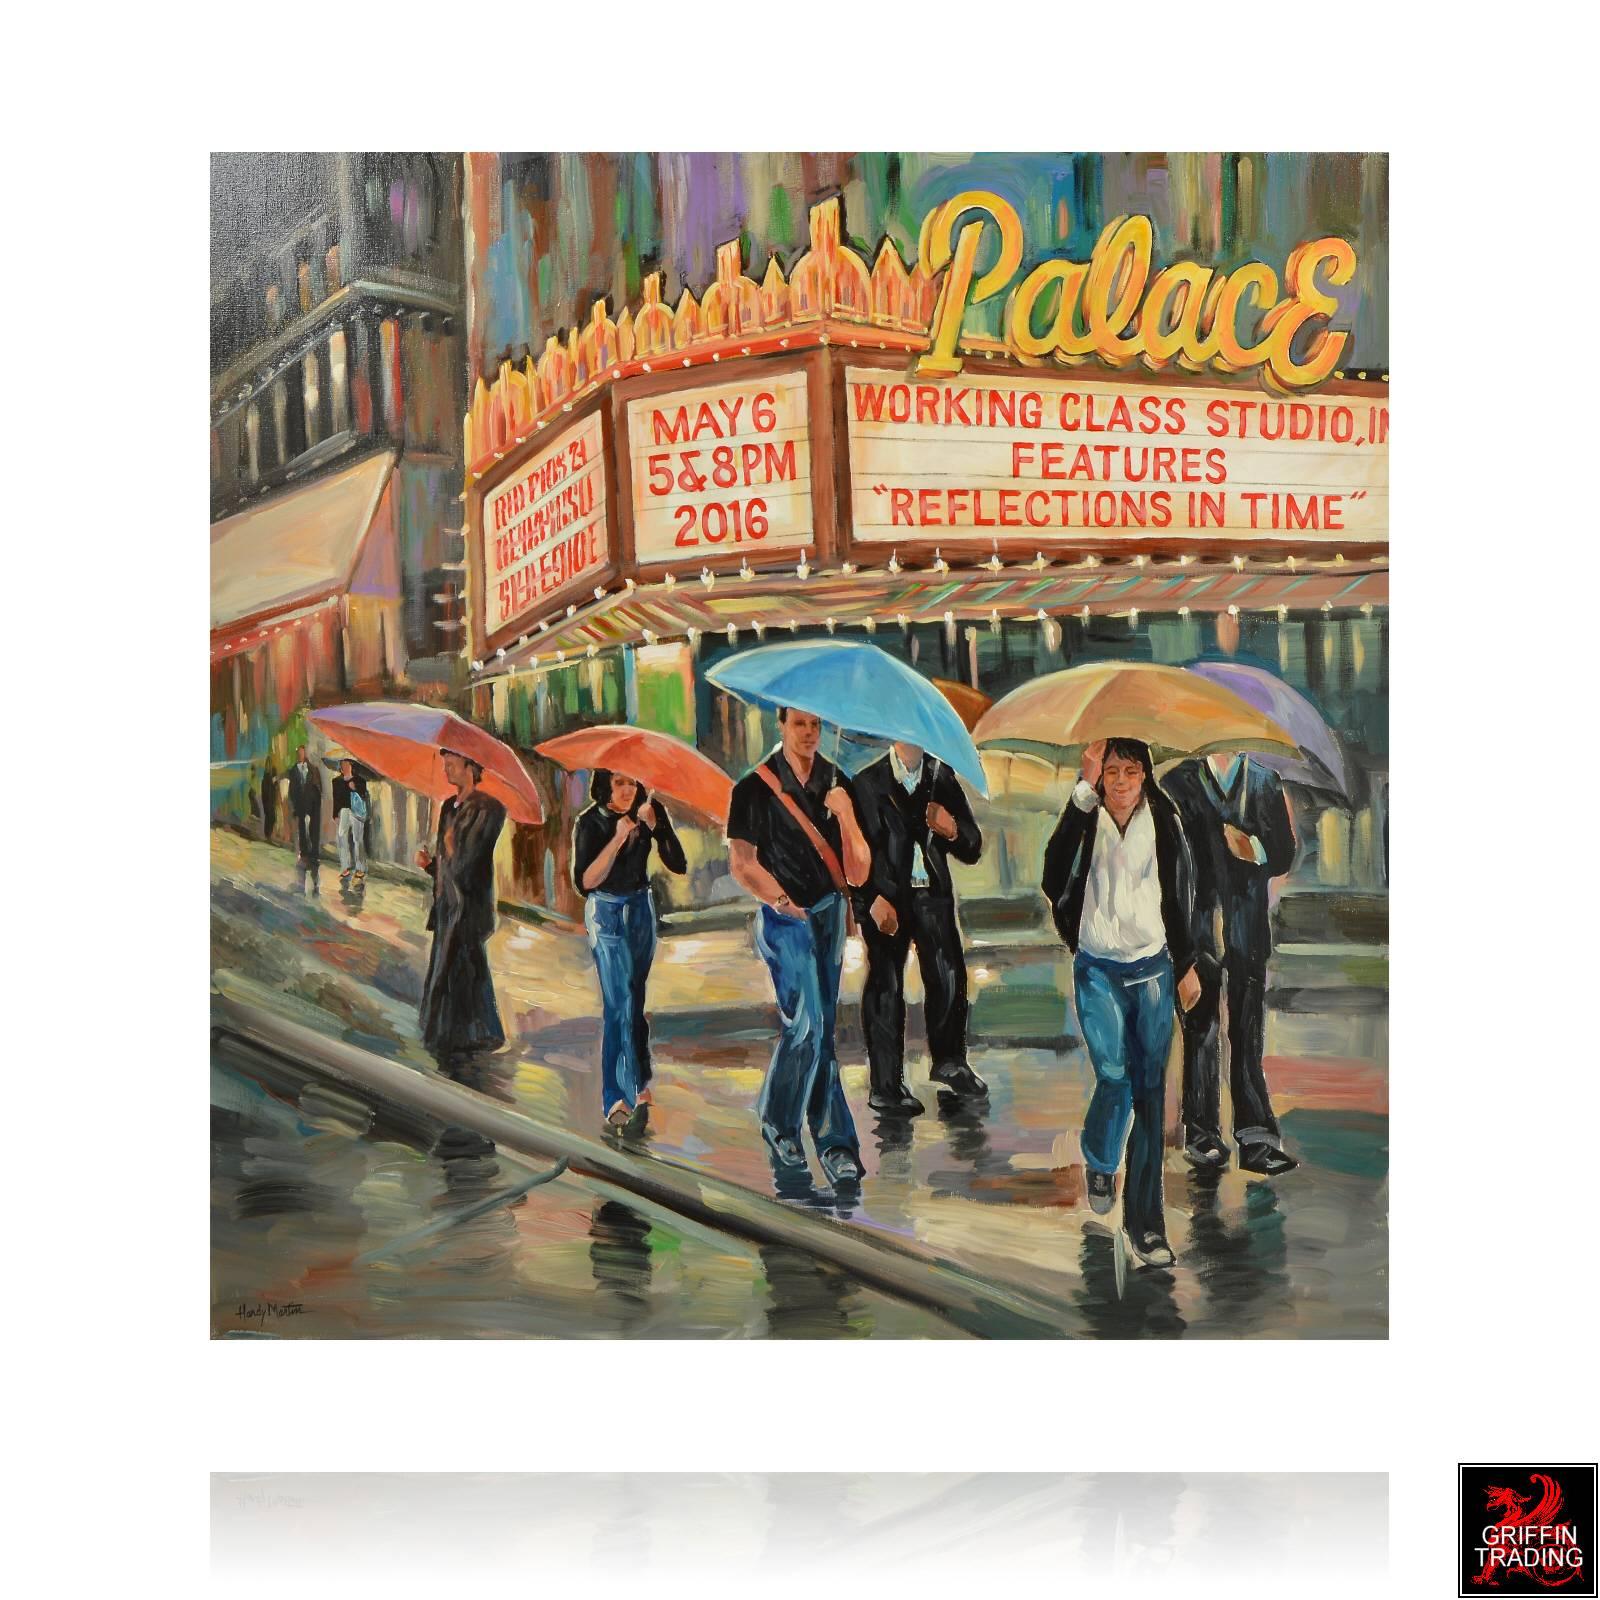 Modern Palace Movie Theater Street Scene in the Rain Signed Original Painting For Sale